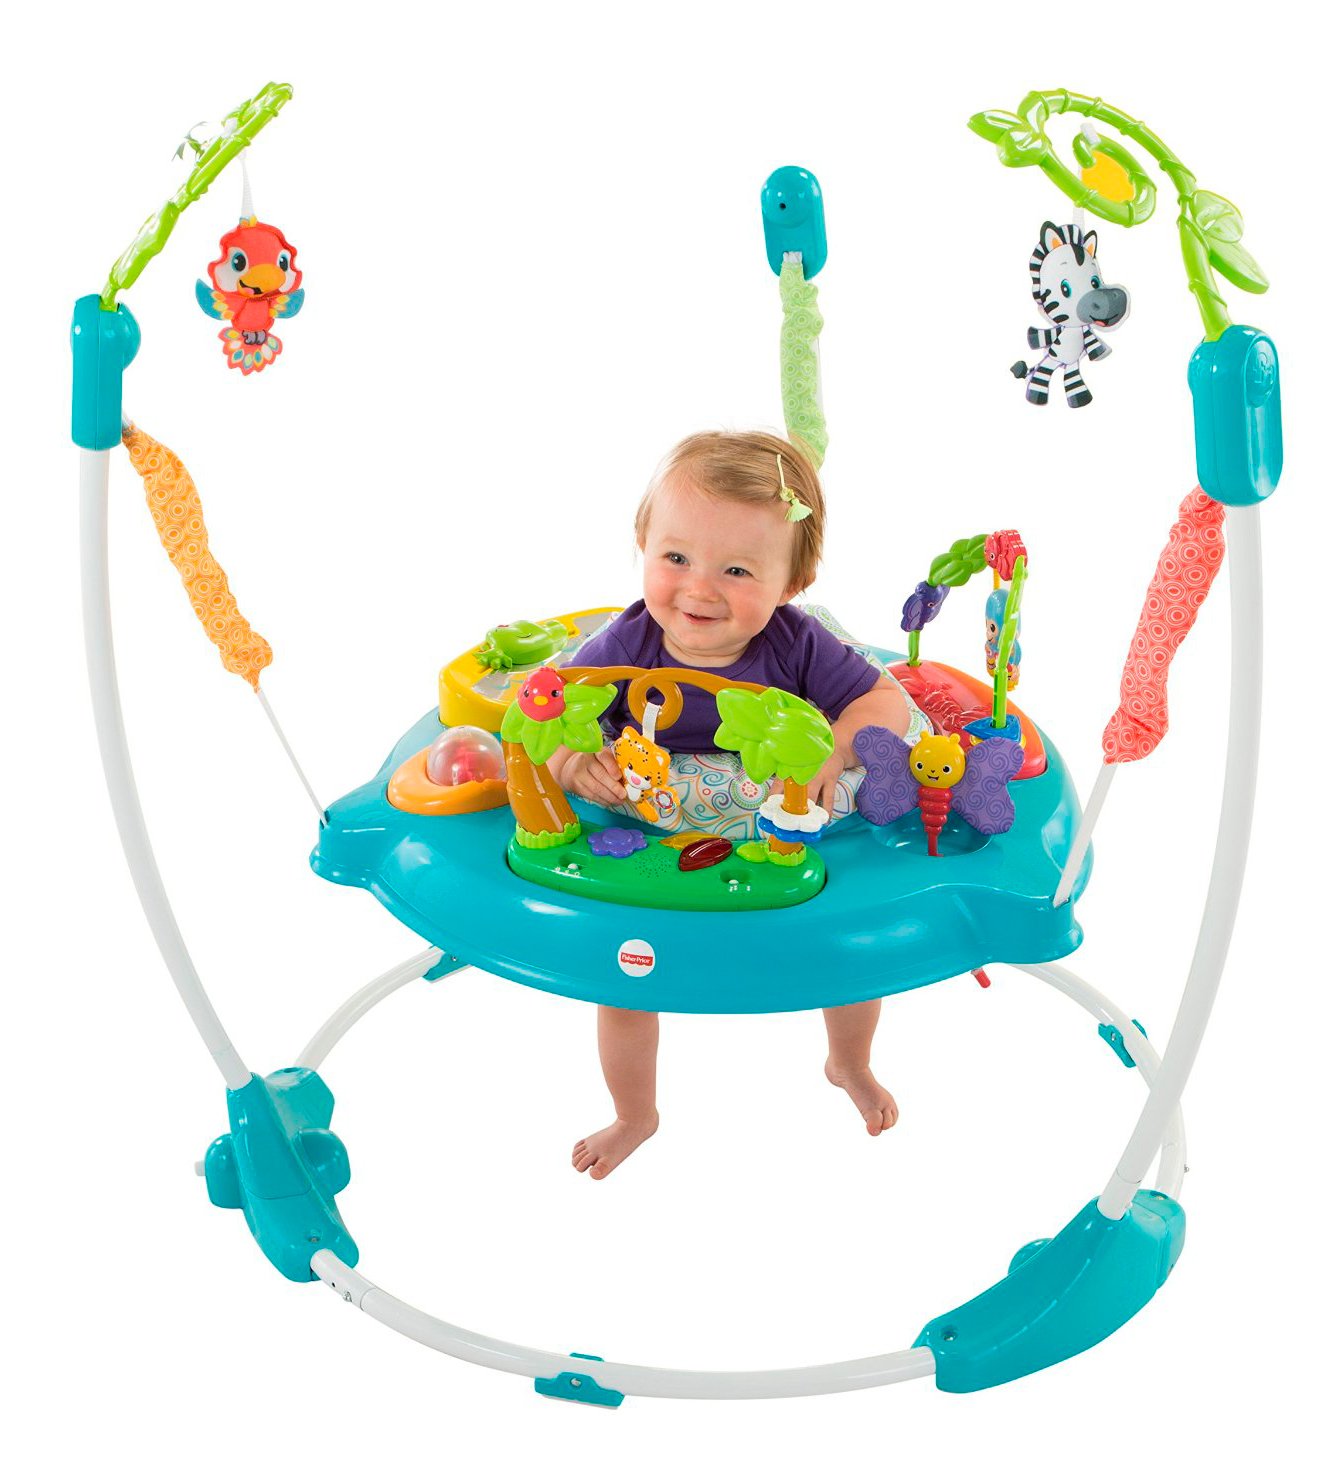 7 Best Fisher Price Jumperoo Reviews in 2022 7